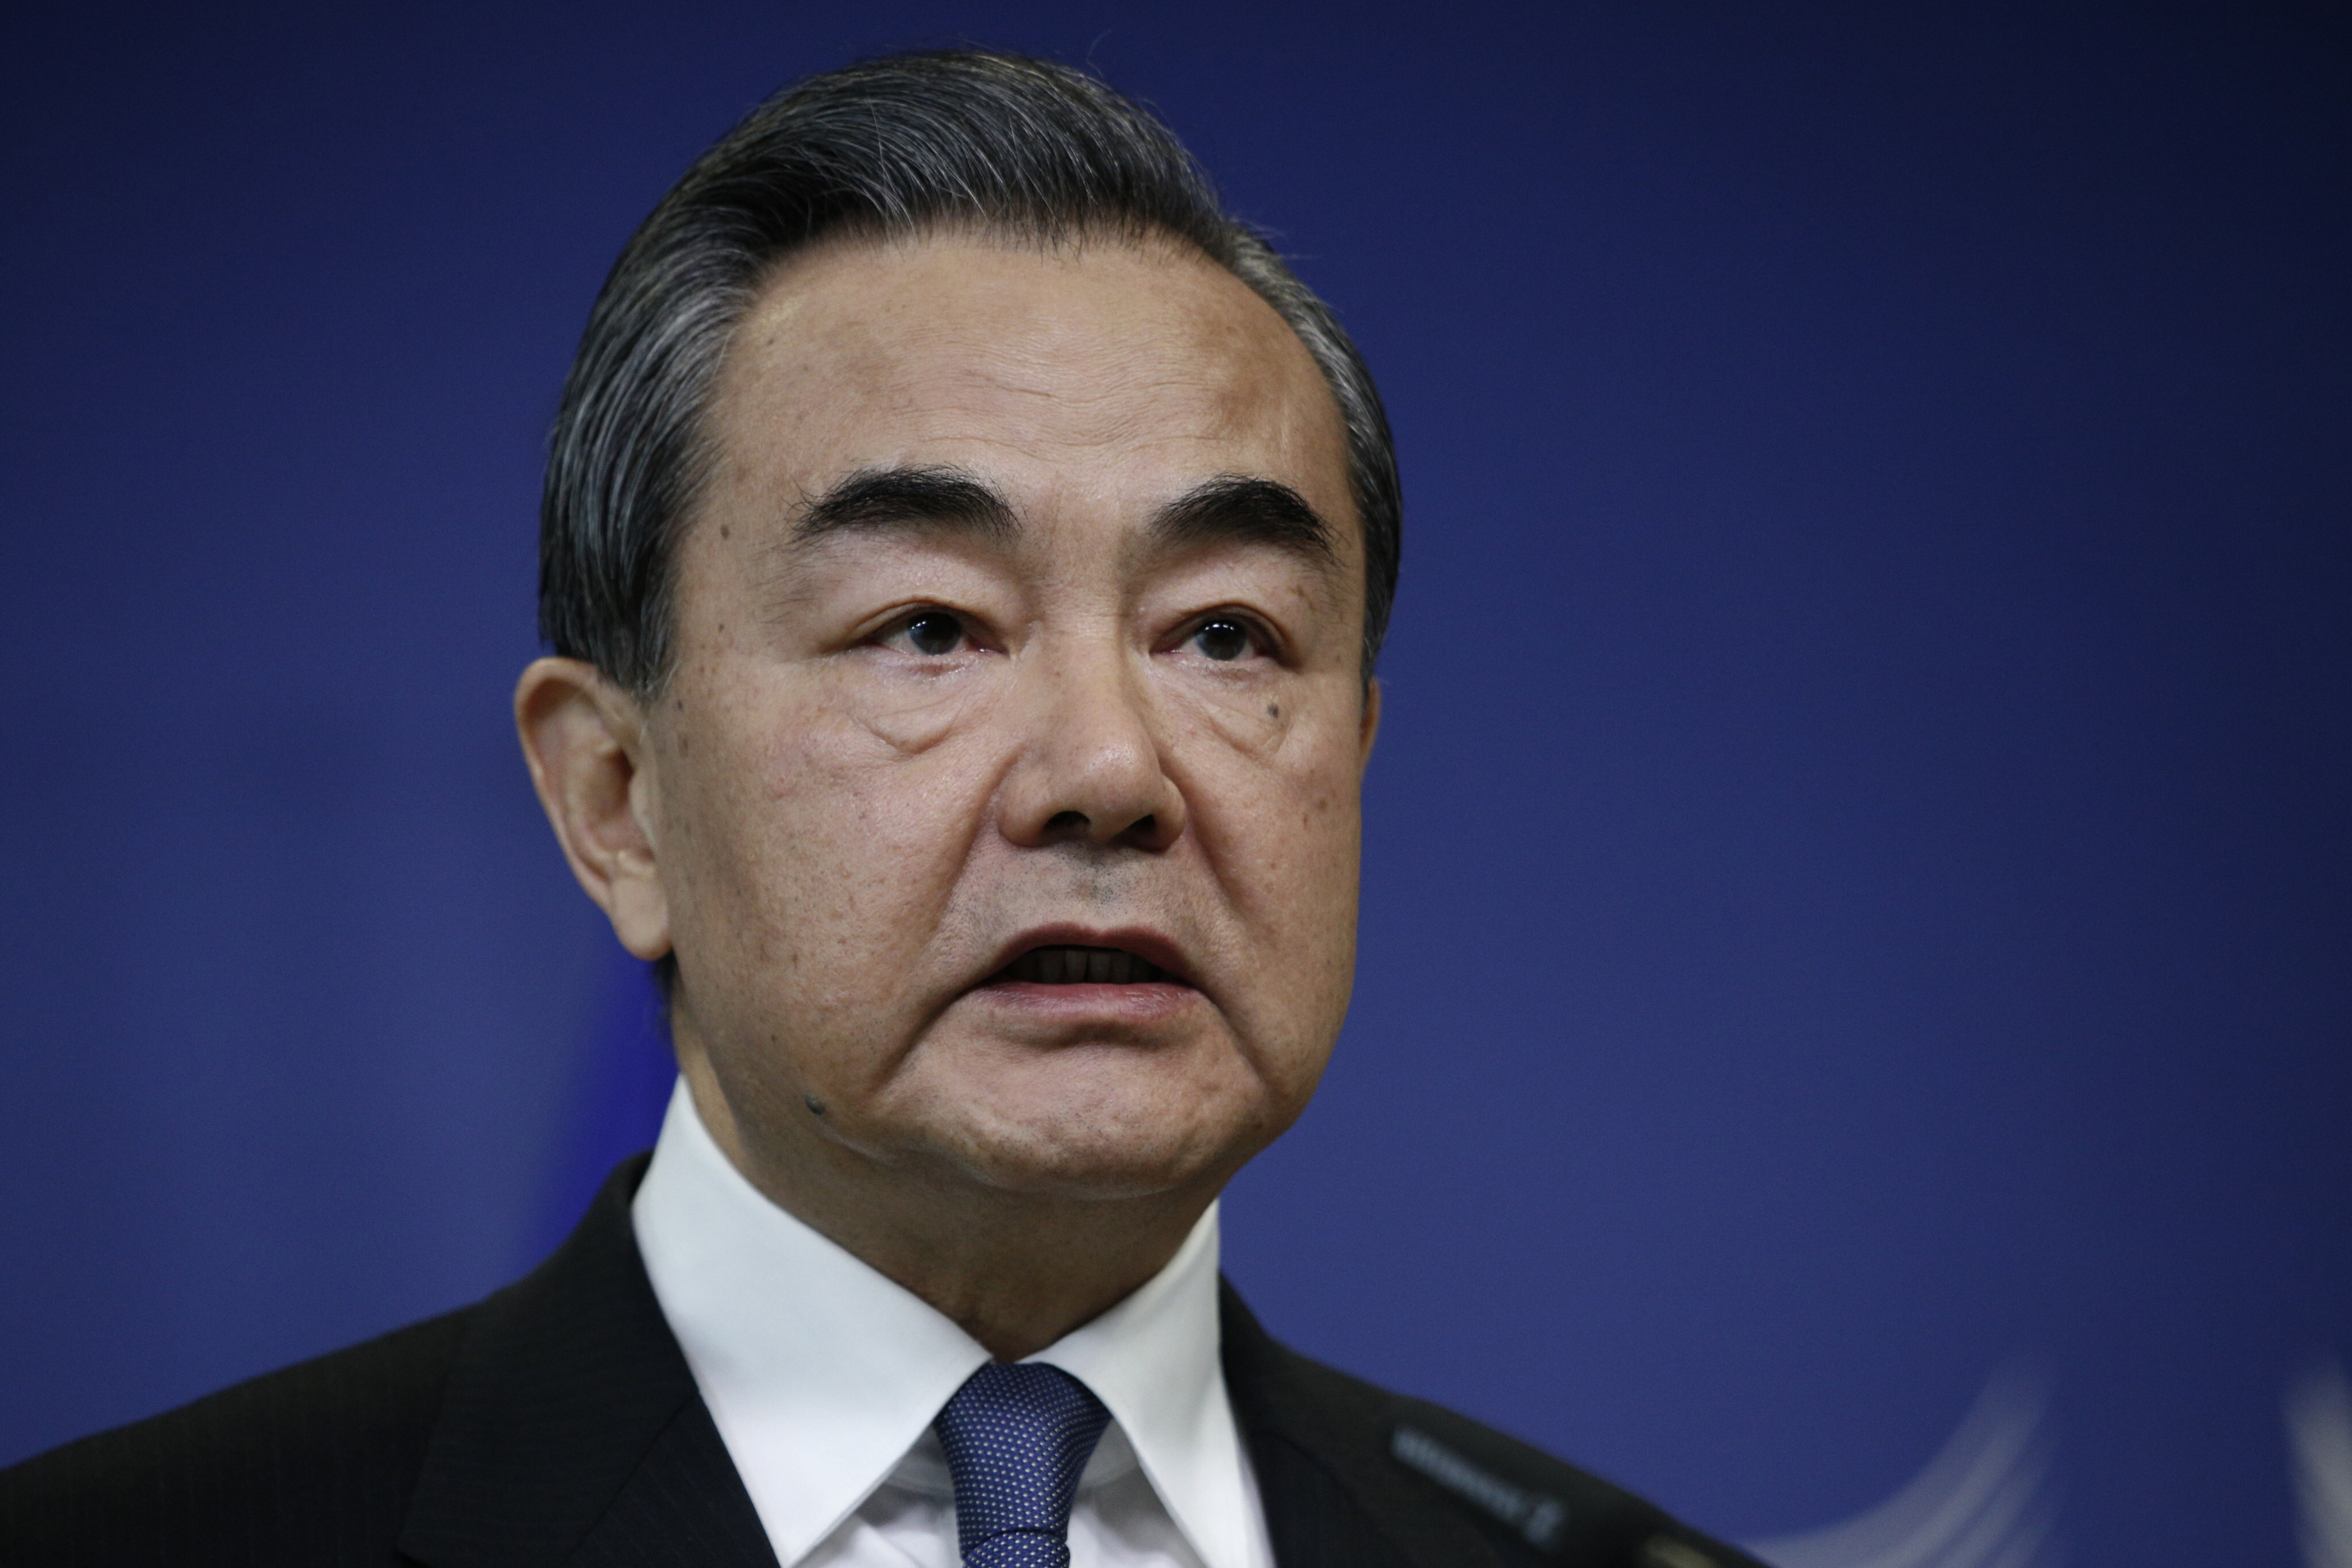 In calling for an end to unilateral sanctions, China’s Foreign Minister Wang Yi has written in state media: “History has repeatedly warned us that self-reliance and bullying the weak are the cause of turmoil.” Photo: Shutterstock